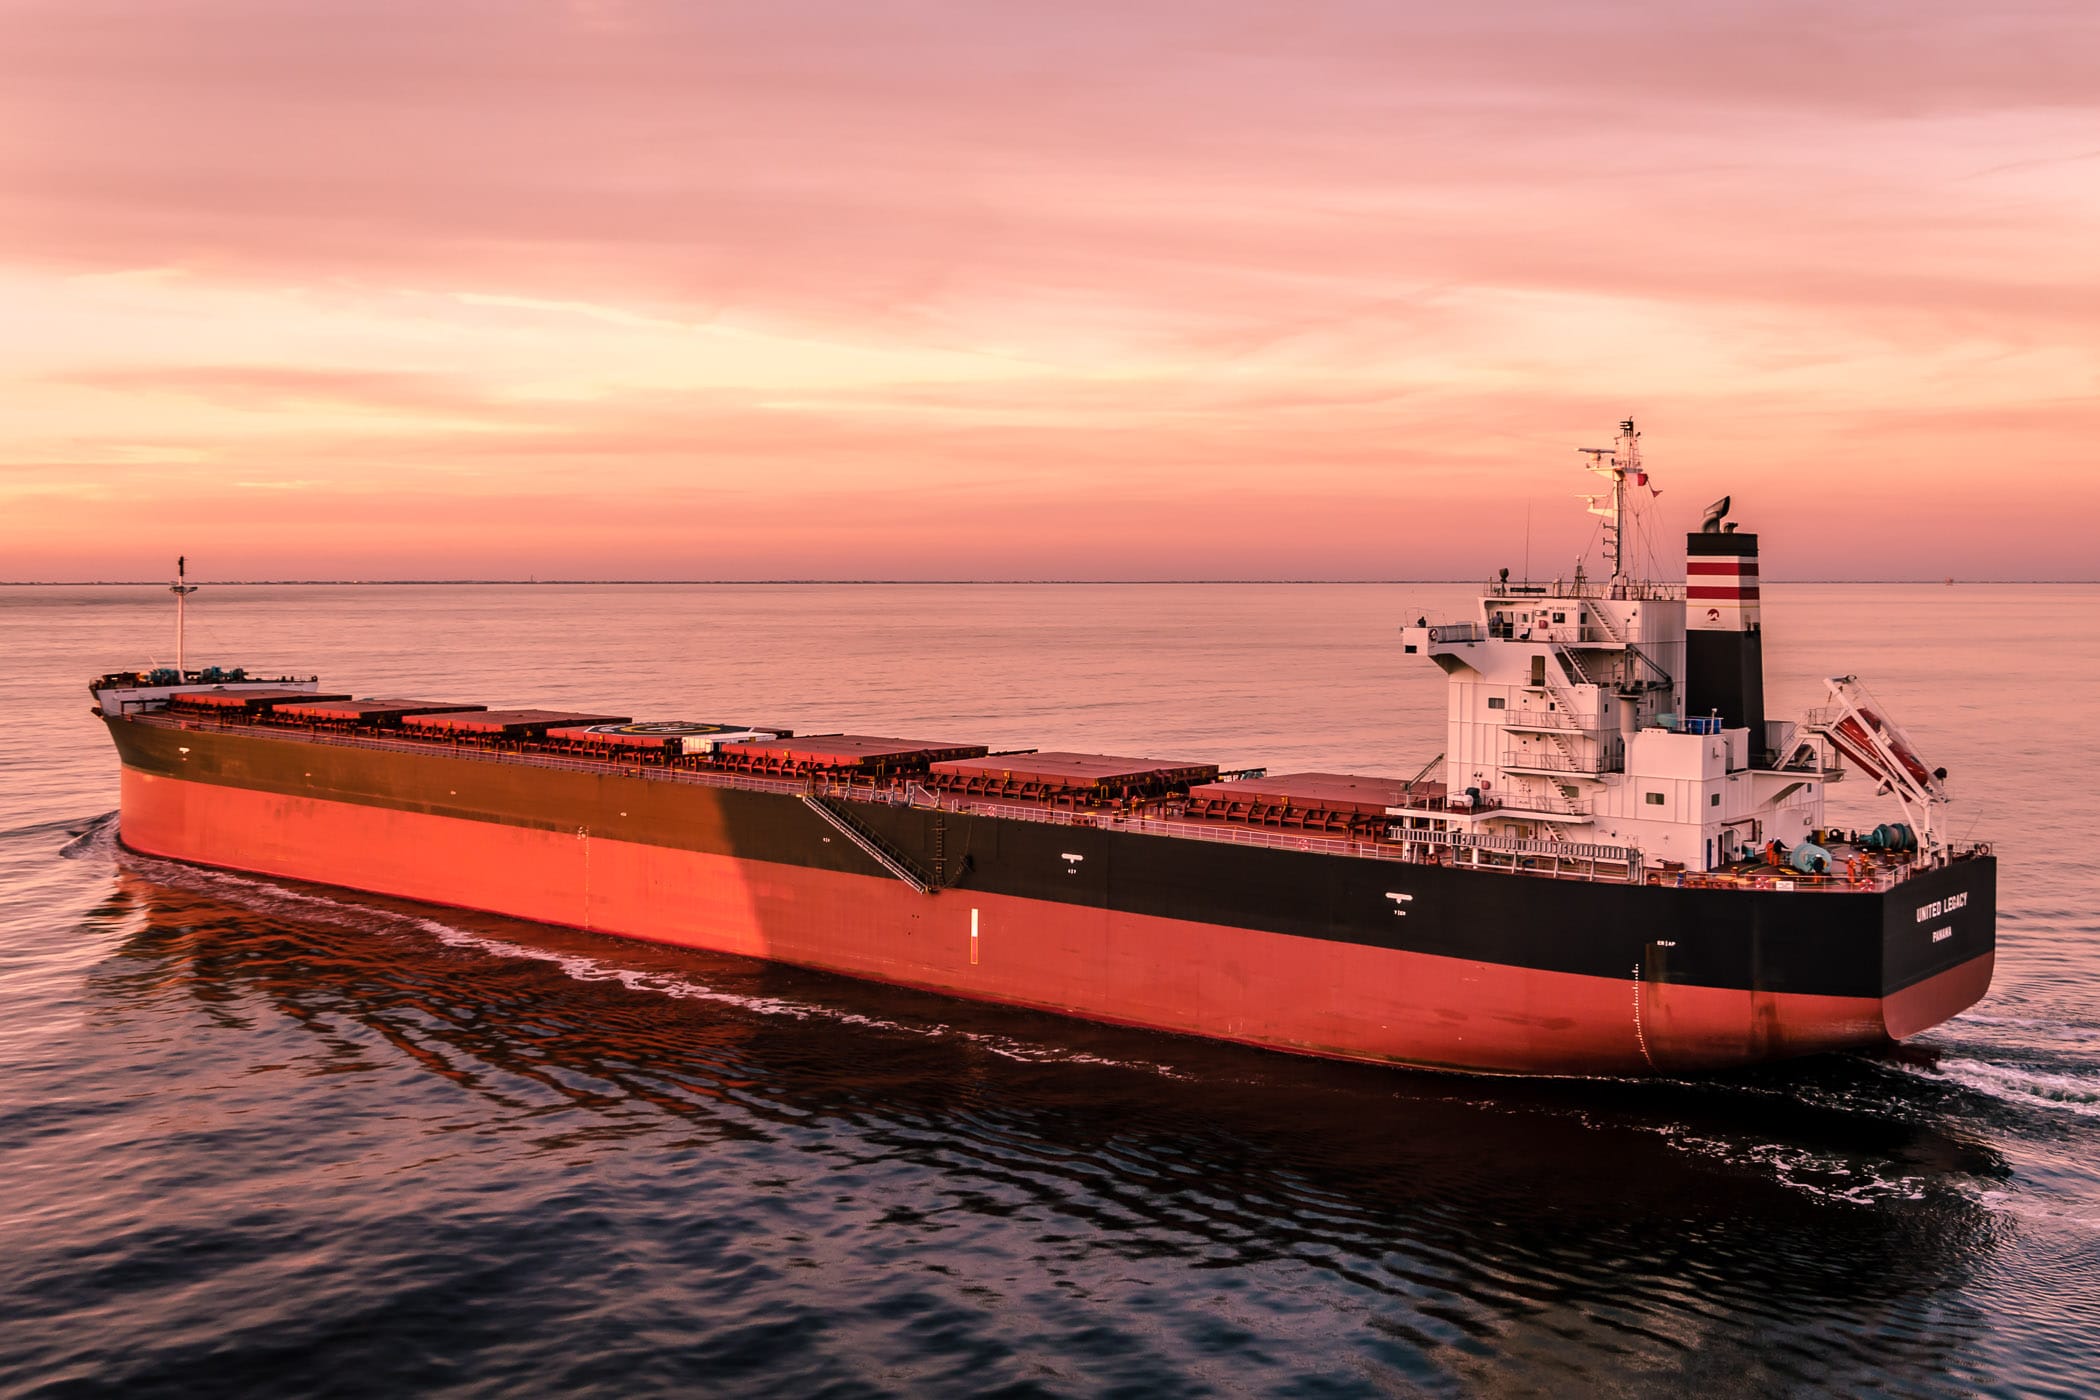 The bulk carrier United Legacy transits Bolivar Roads just off the coast of Galveston, Texas, as the sun sets on the Gulf of Mexico.